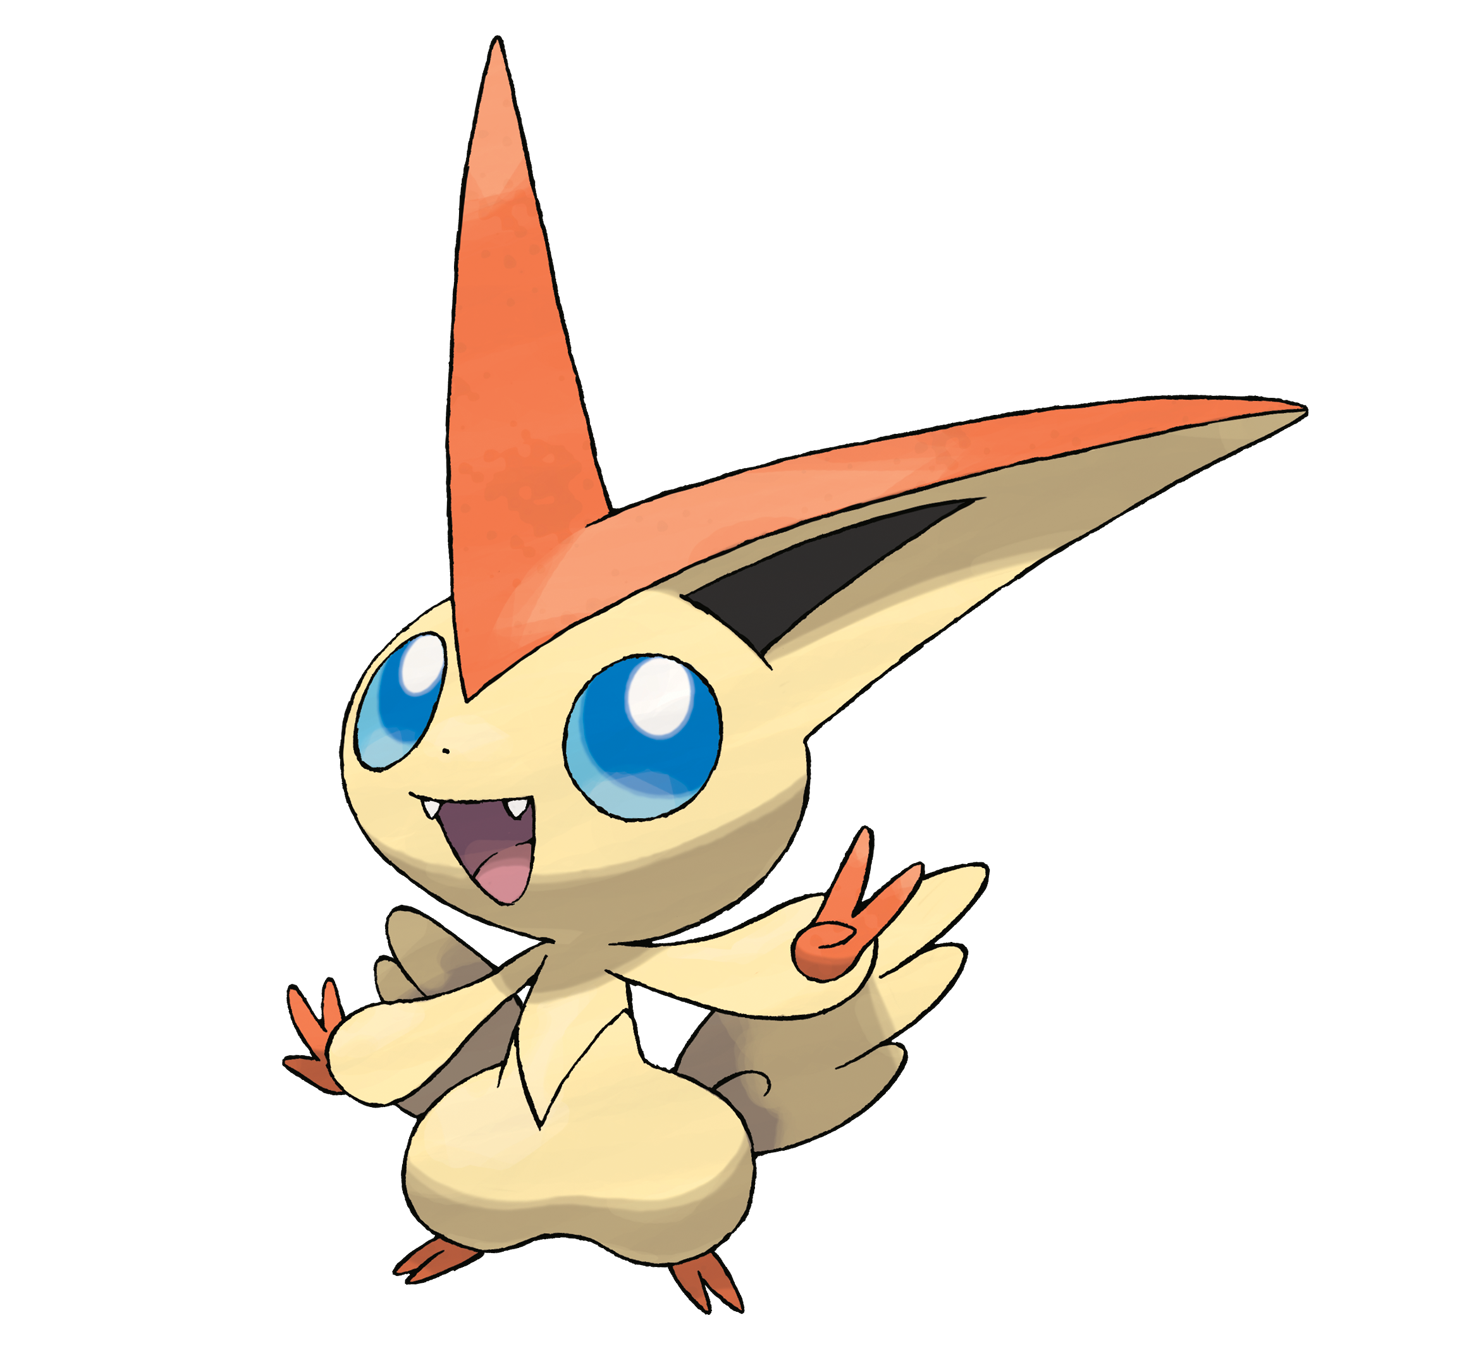 http://images2.wikia.nocookie.net/__cb20110326181749/es.pokemon/images/4/45/Victini.png